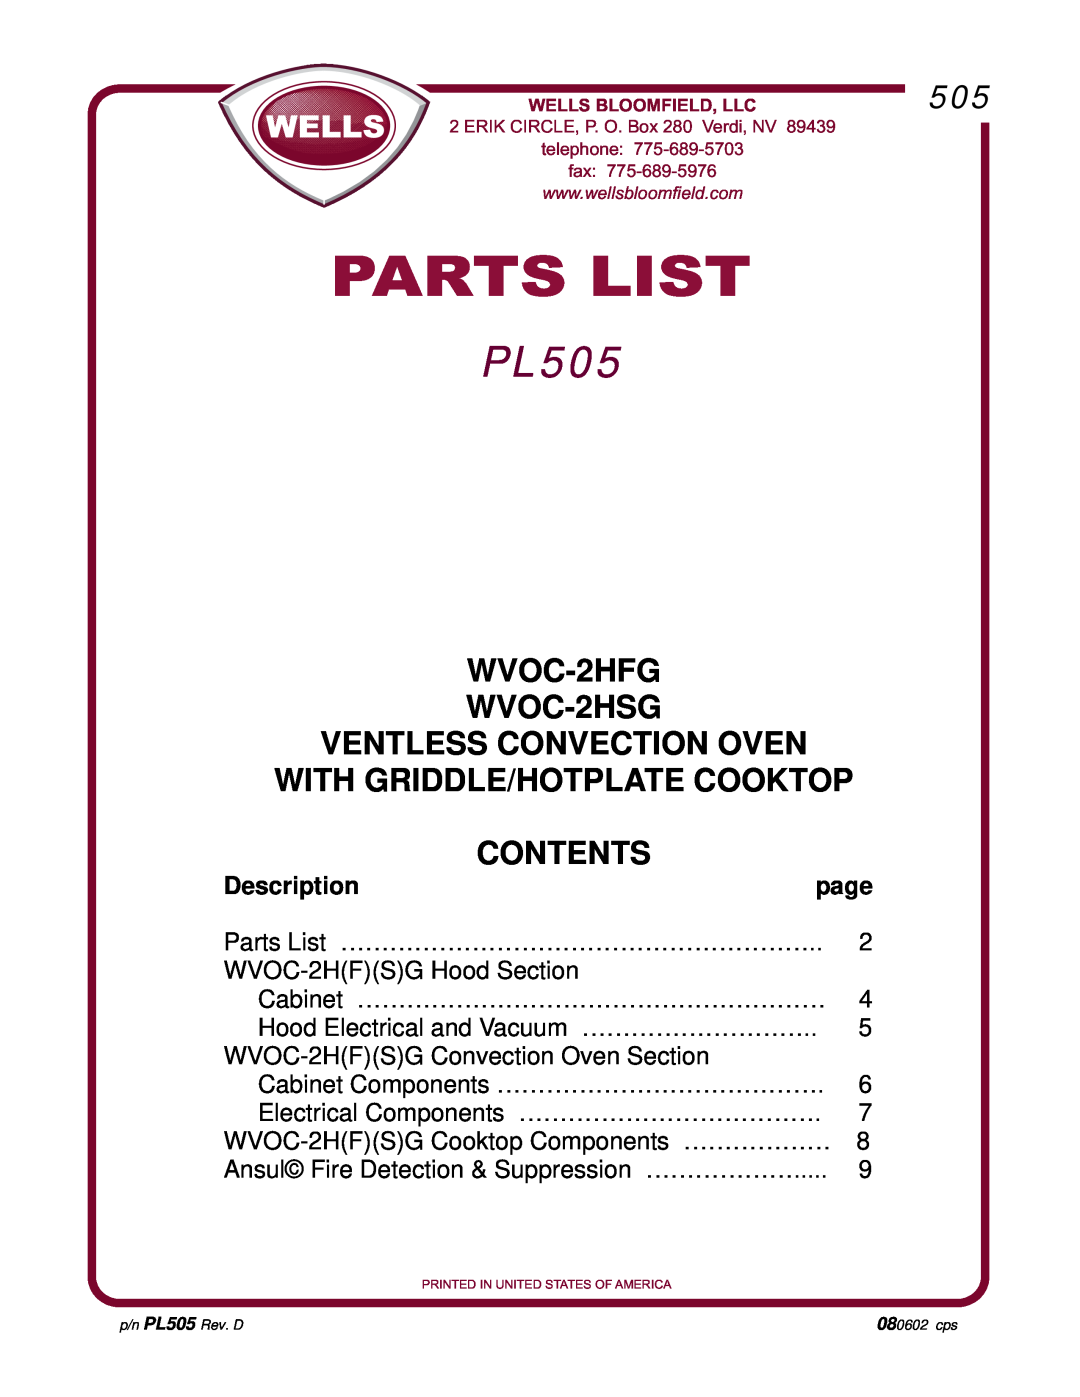 Wells manual Parts List, PL505, WVOC-2HFG WVOC-2HSG VENTLESS CONVECTION OVEN, With Griddle/Hotplate Cooktop Contents 